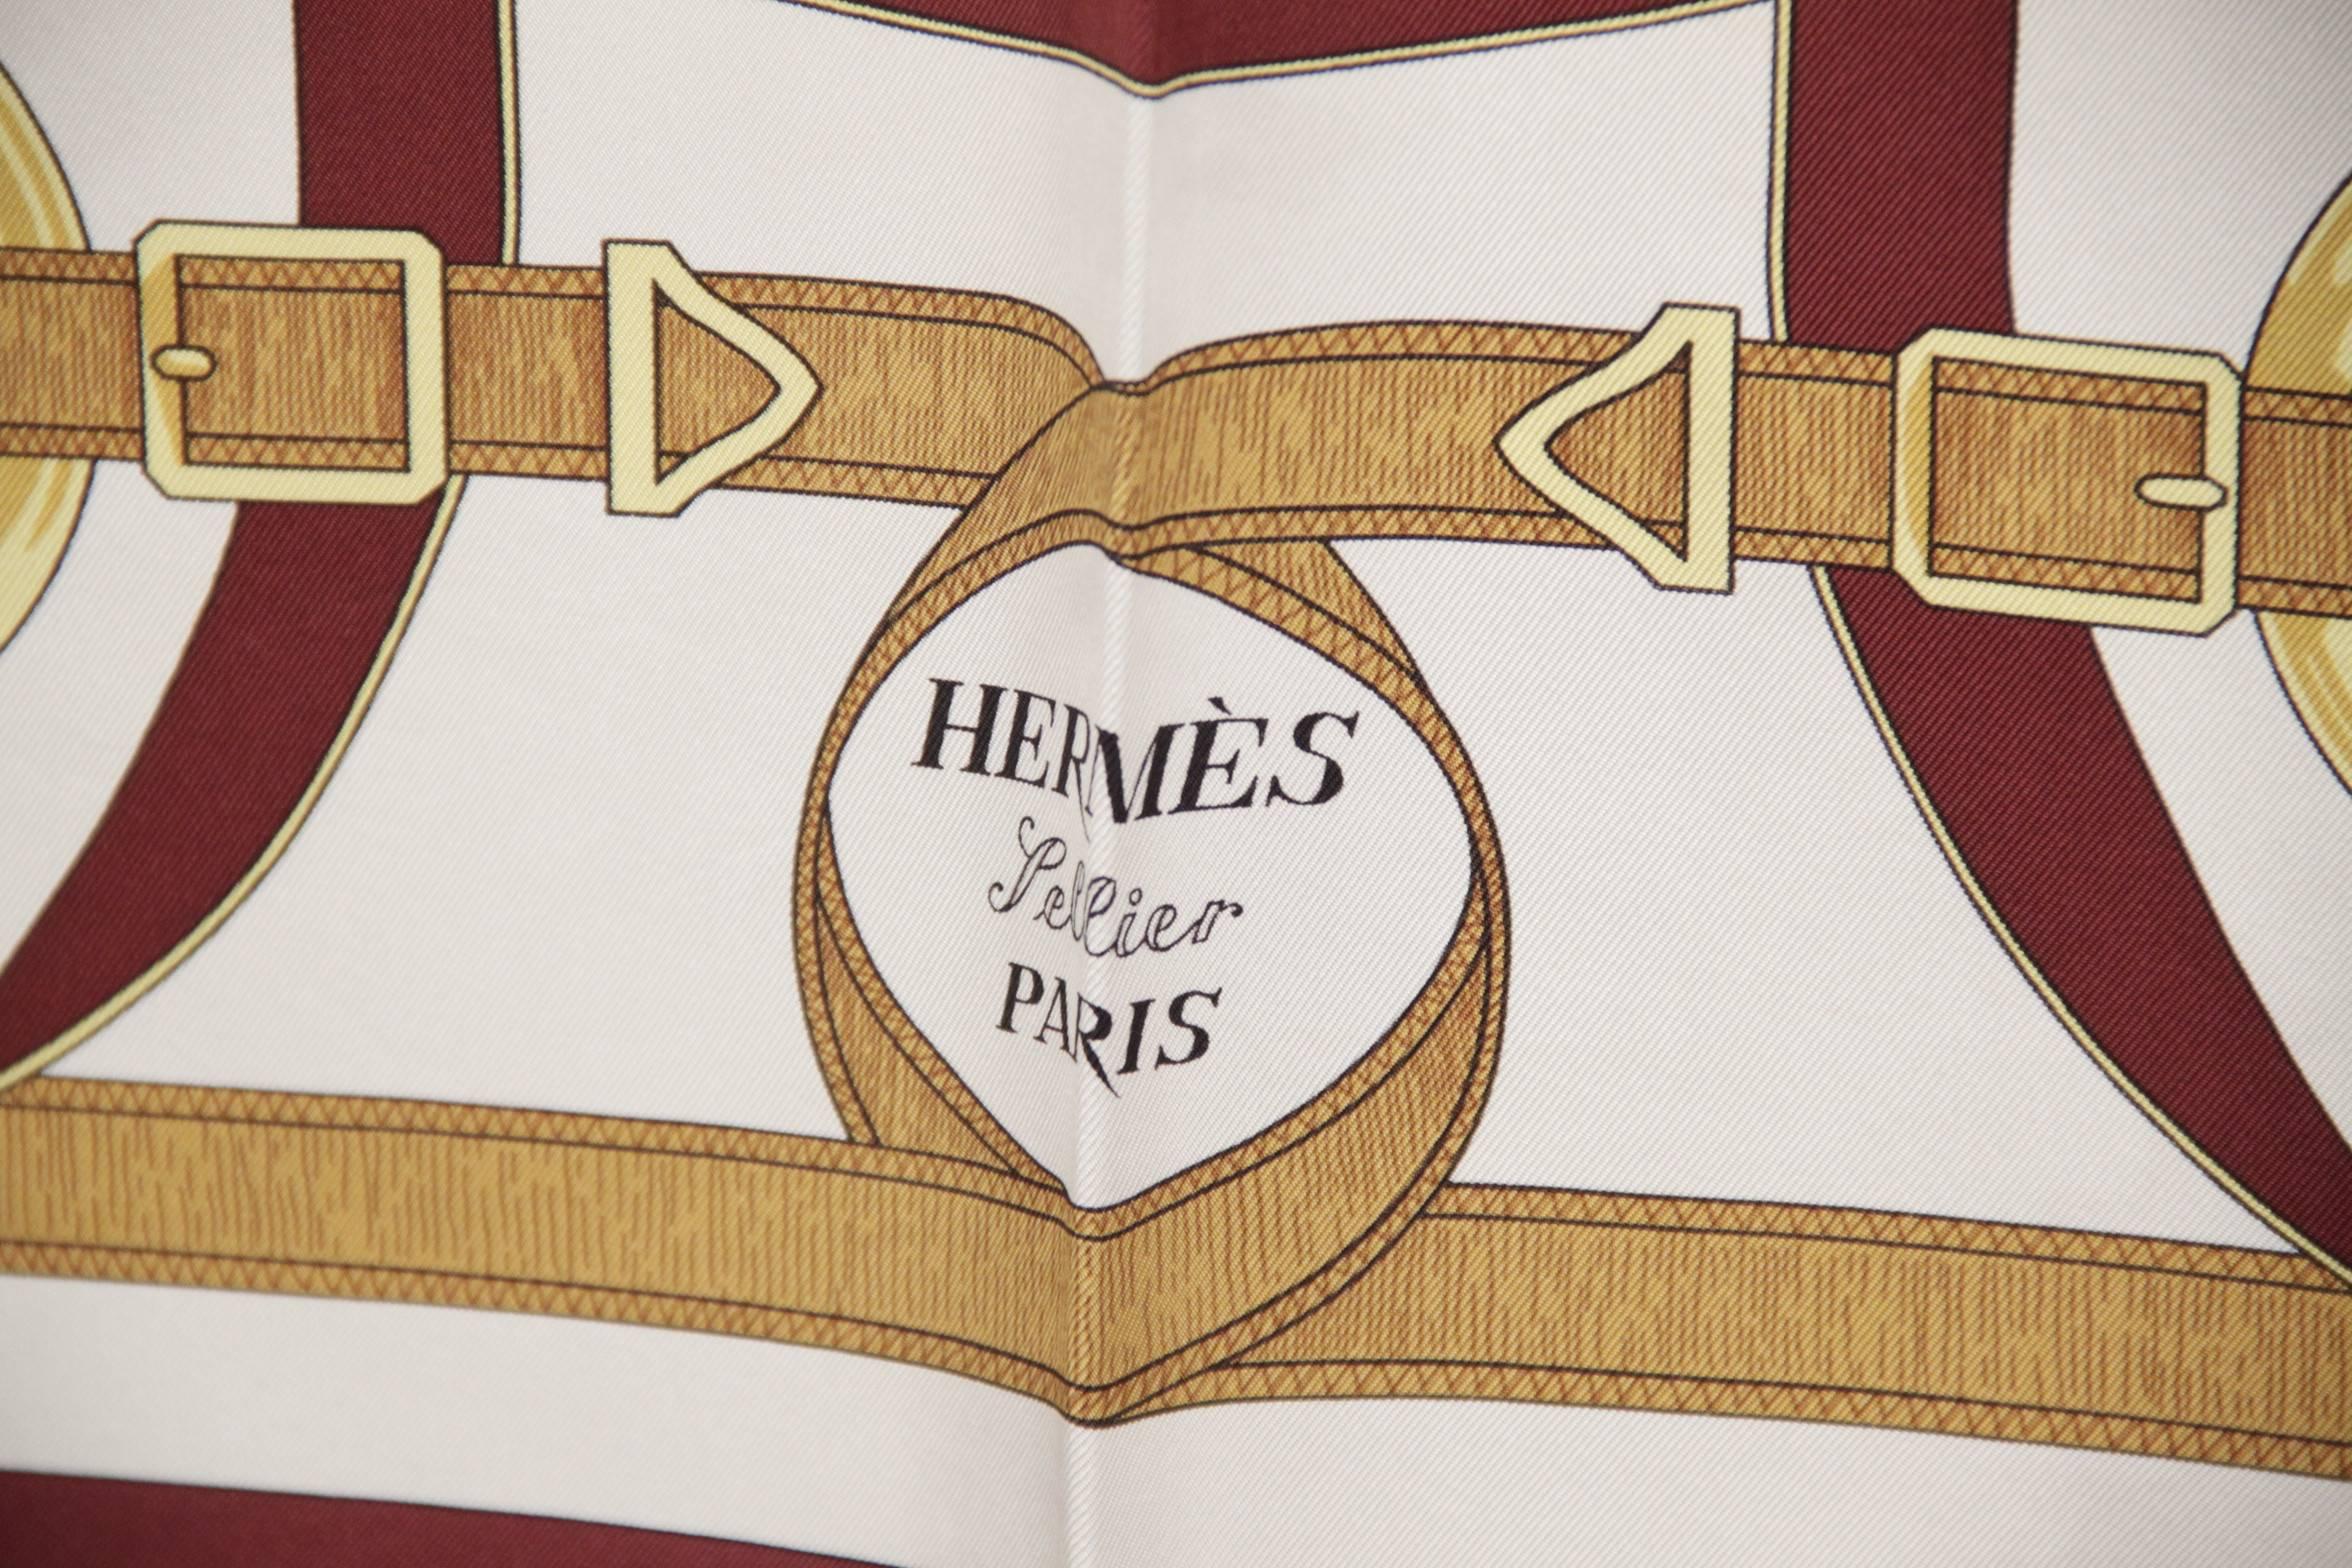  Brand: HERMES PARIS - Made in France

Logos / Tags: 'HERMES Sellier Paris' printed on the scarf, composition tag, HERMES with copyright signature printed on a corner

Condition rate & details (please read our condition chart below): C :FAIR